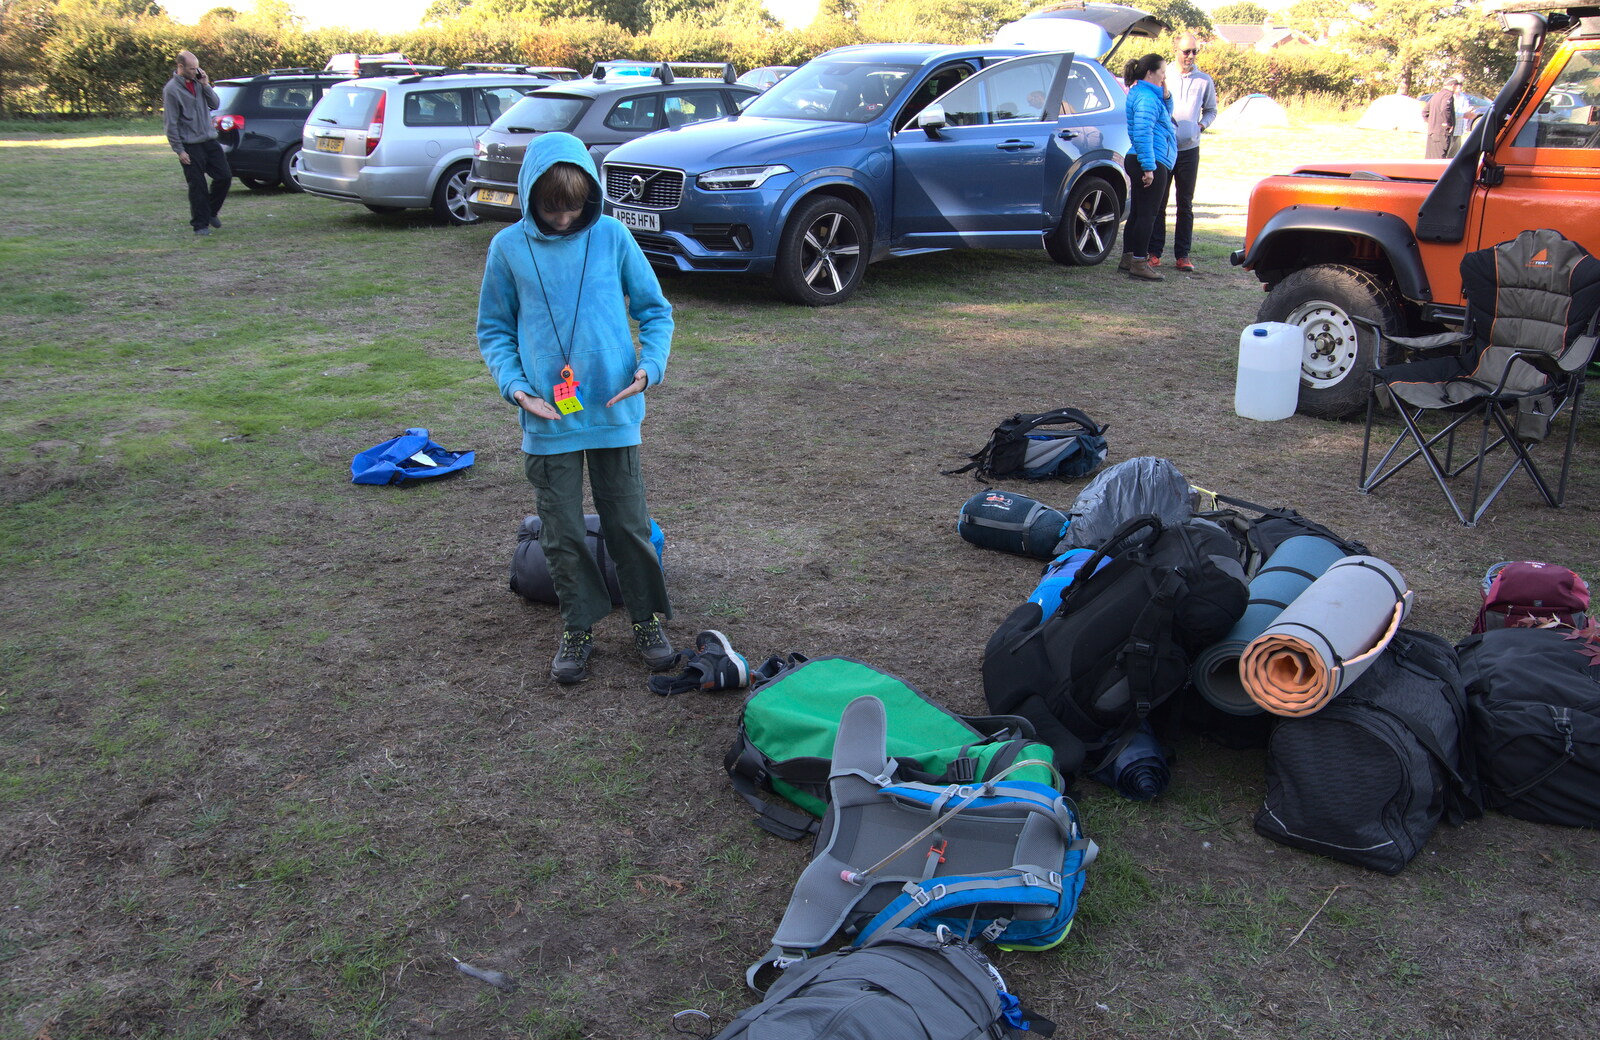 Harry stands around a pile of camping gear from Harry's Scout Hike, Walberswick and Dunwich, Suffolk - 9th October 2022